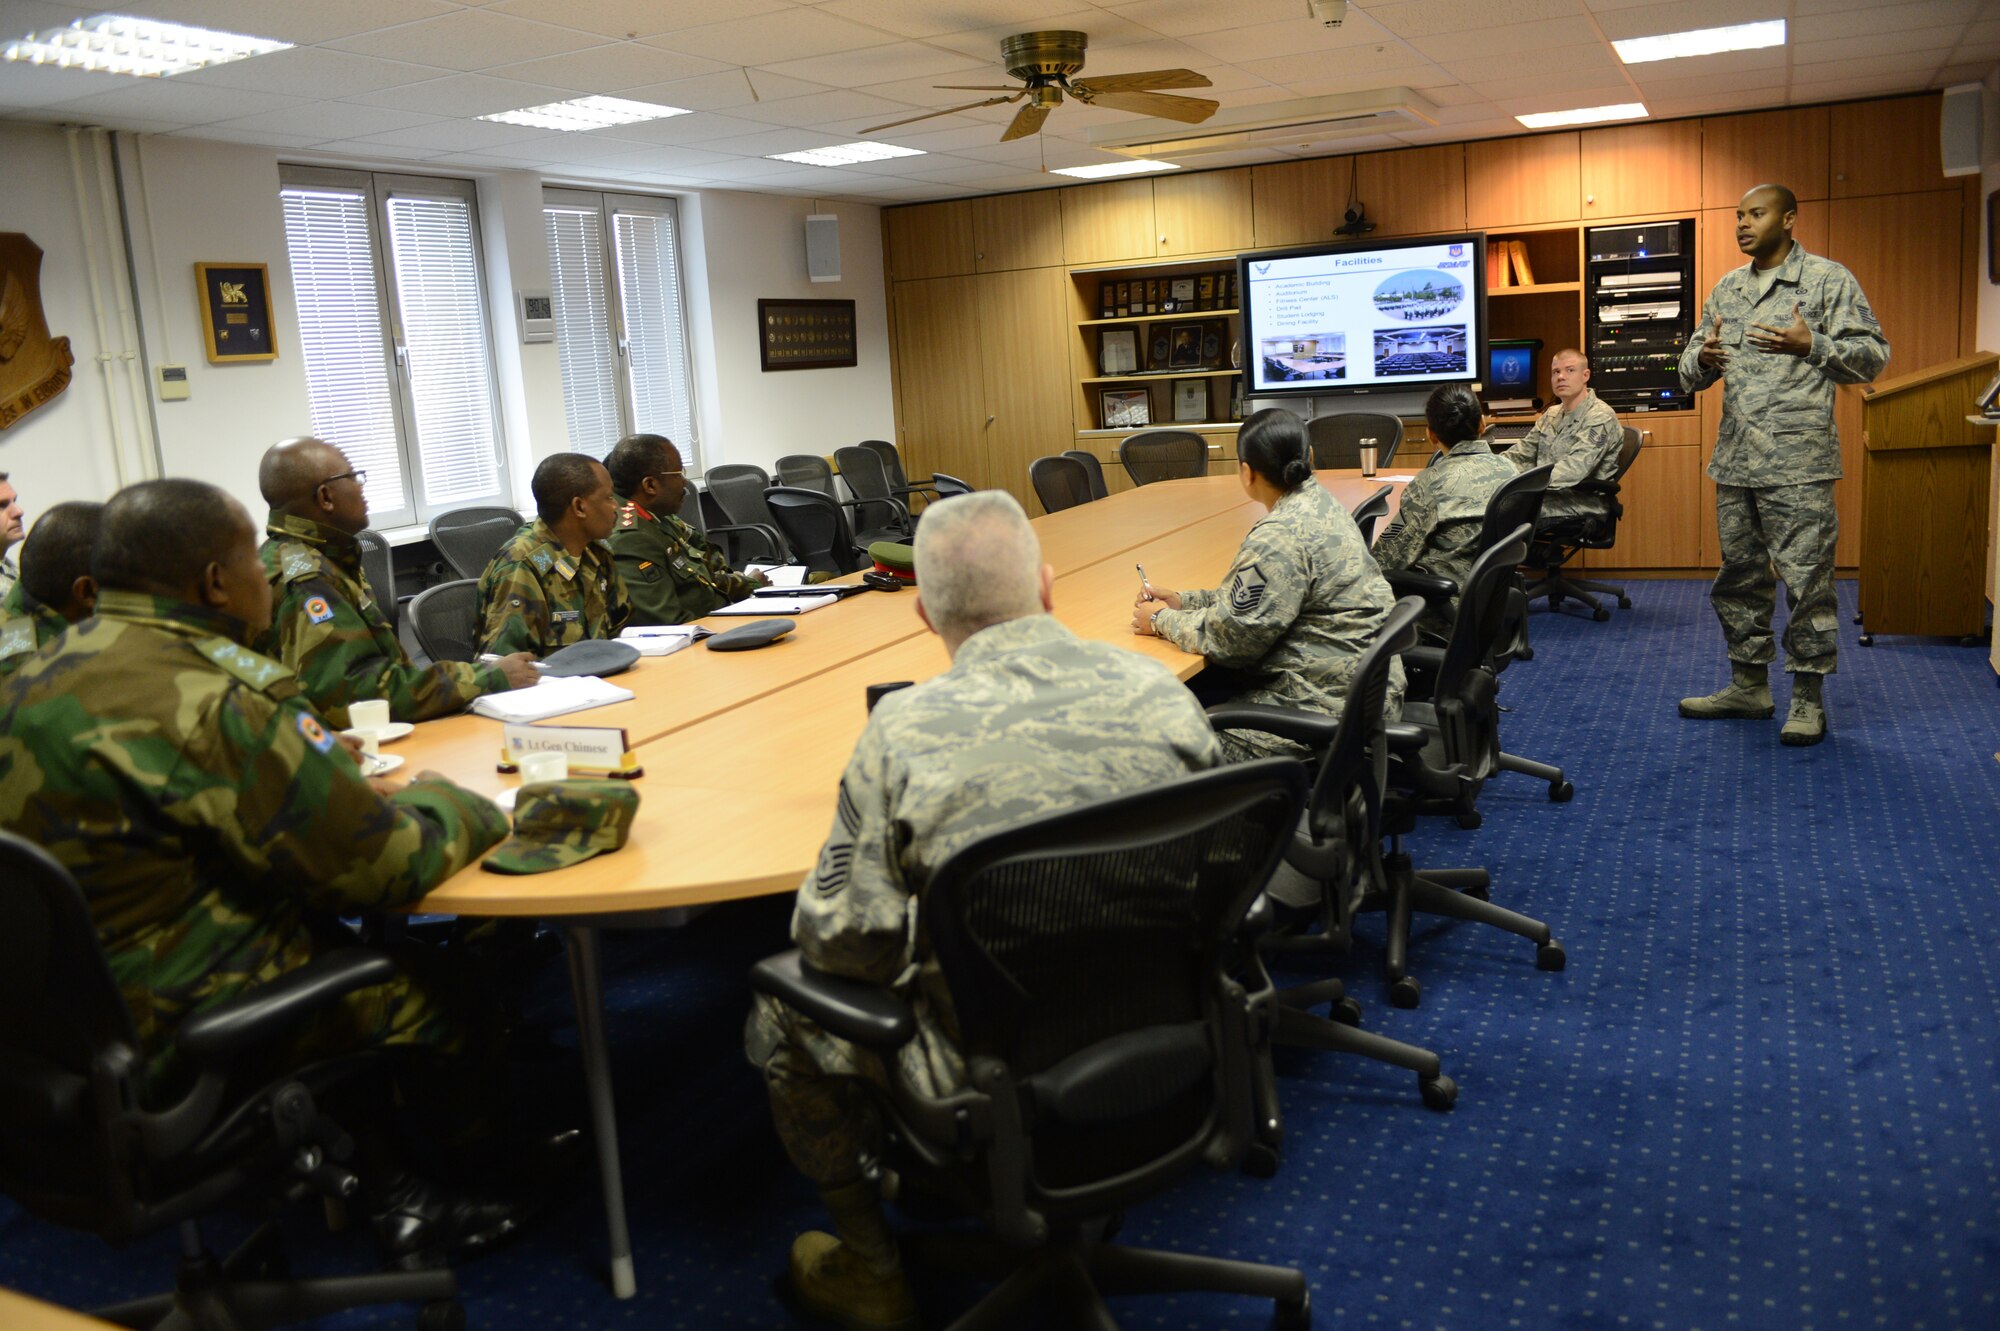 Tech. Sgt. Corey Survillion, Kisling NCO Academy instructor, informs members of the Zambian air force of the mission at the NCOA, April 30, 2013 on Kapaun, Germany. The visit gave the Zambian air force a chance to further military relations and improve the partnership between the U.S. and Zambian air forces. (U.S. Air Force photo/Senior Airman Caitlin O’Neil-McKeown)